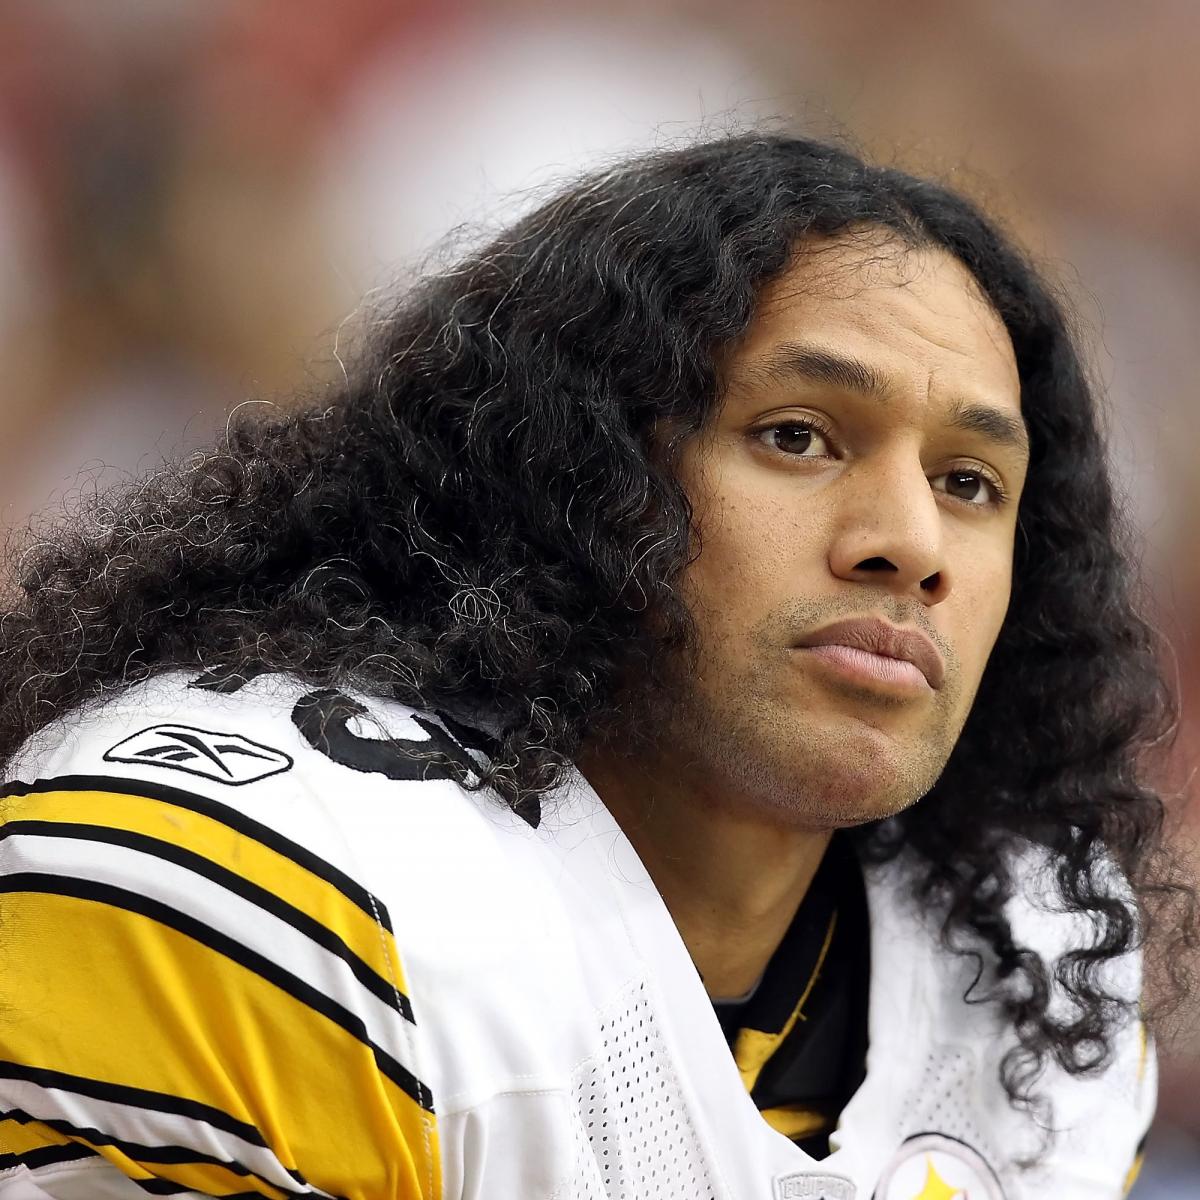 Troy Polamalu Haircut Was Nice Gesture from Steelers Safety | Bleacher Report | Latest ...